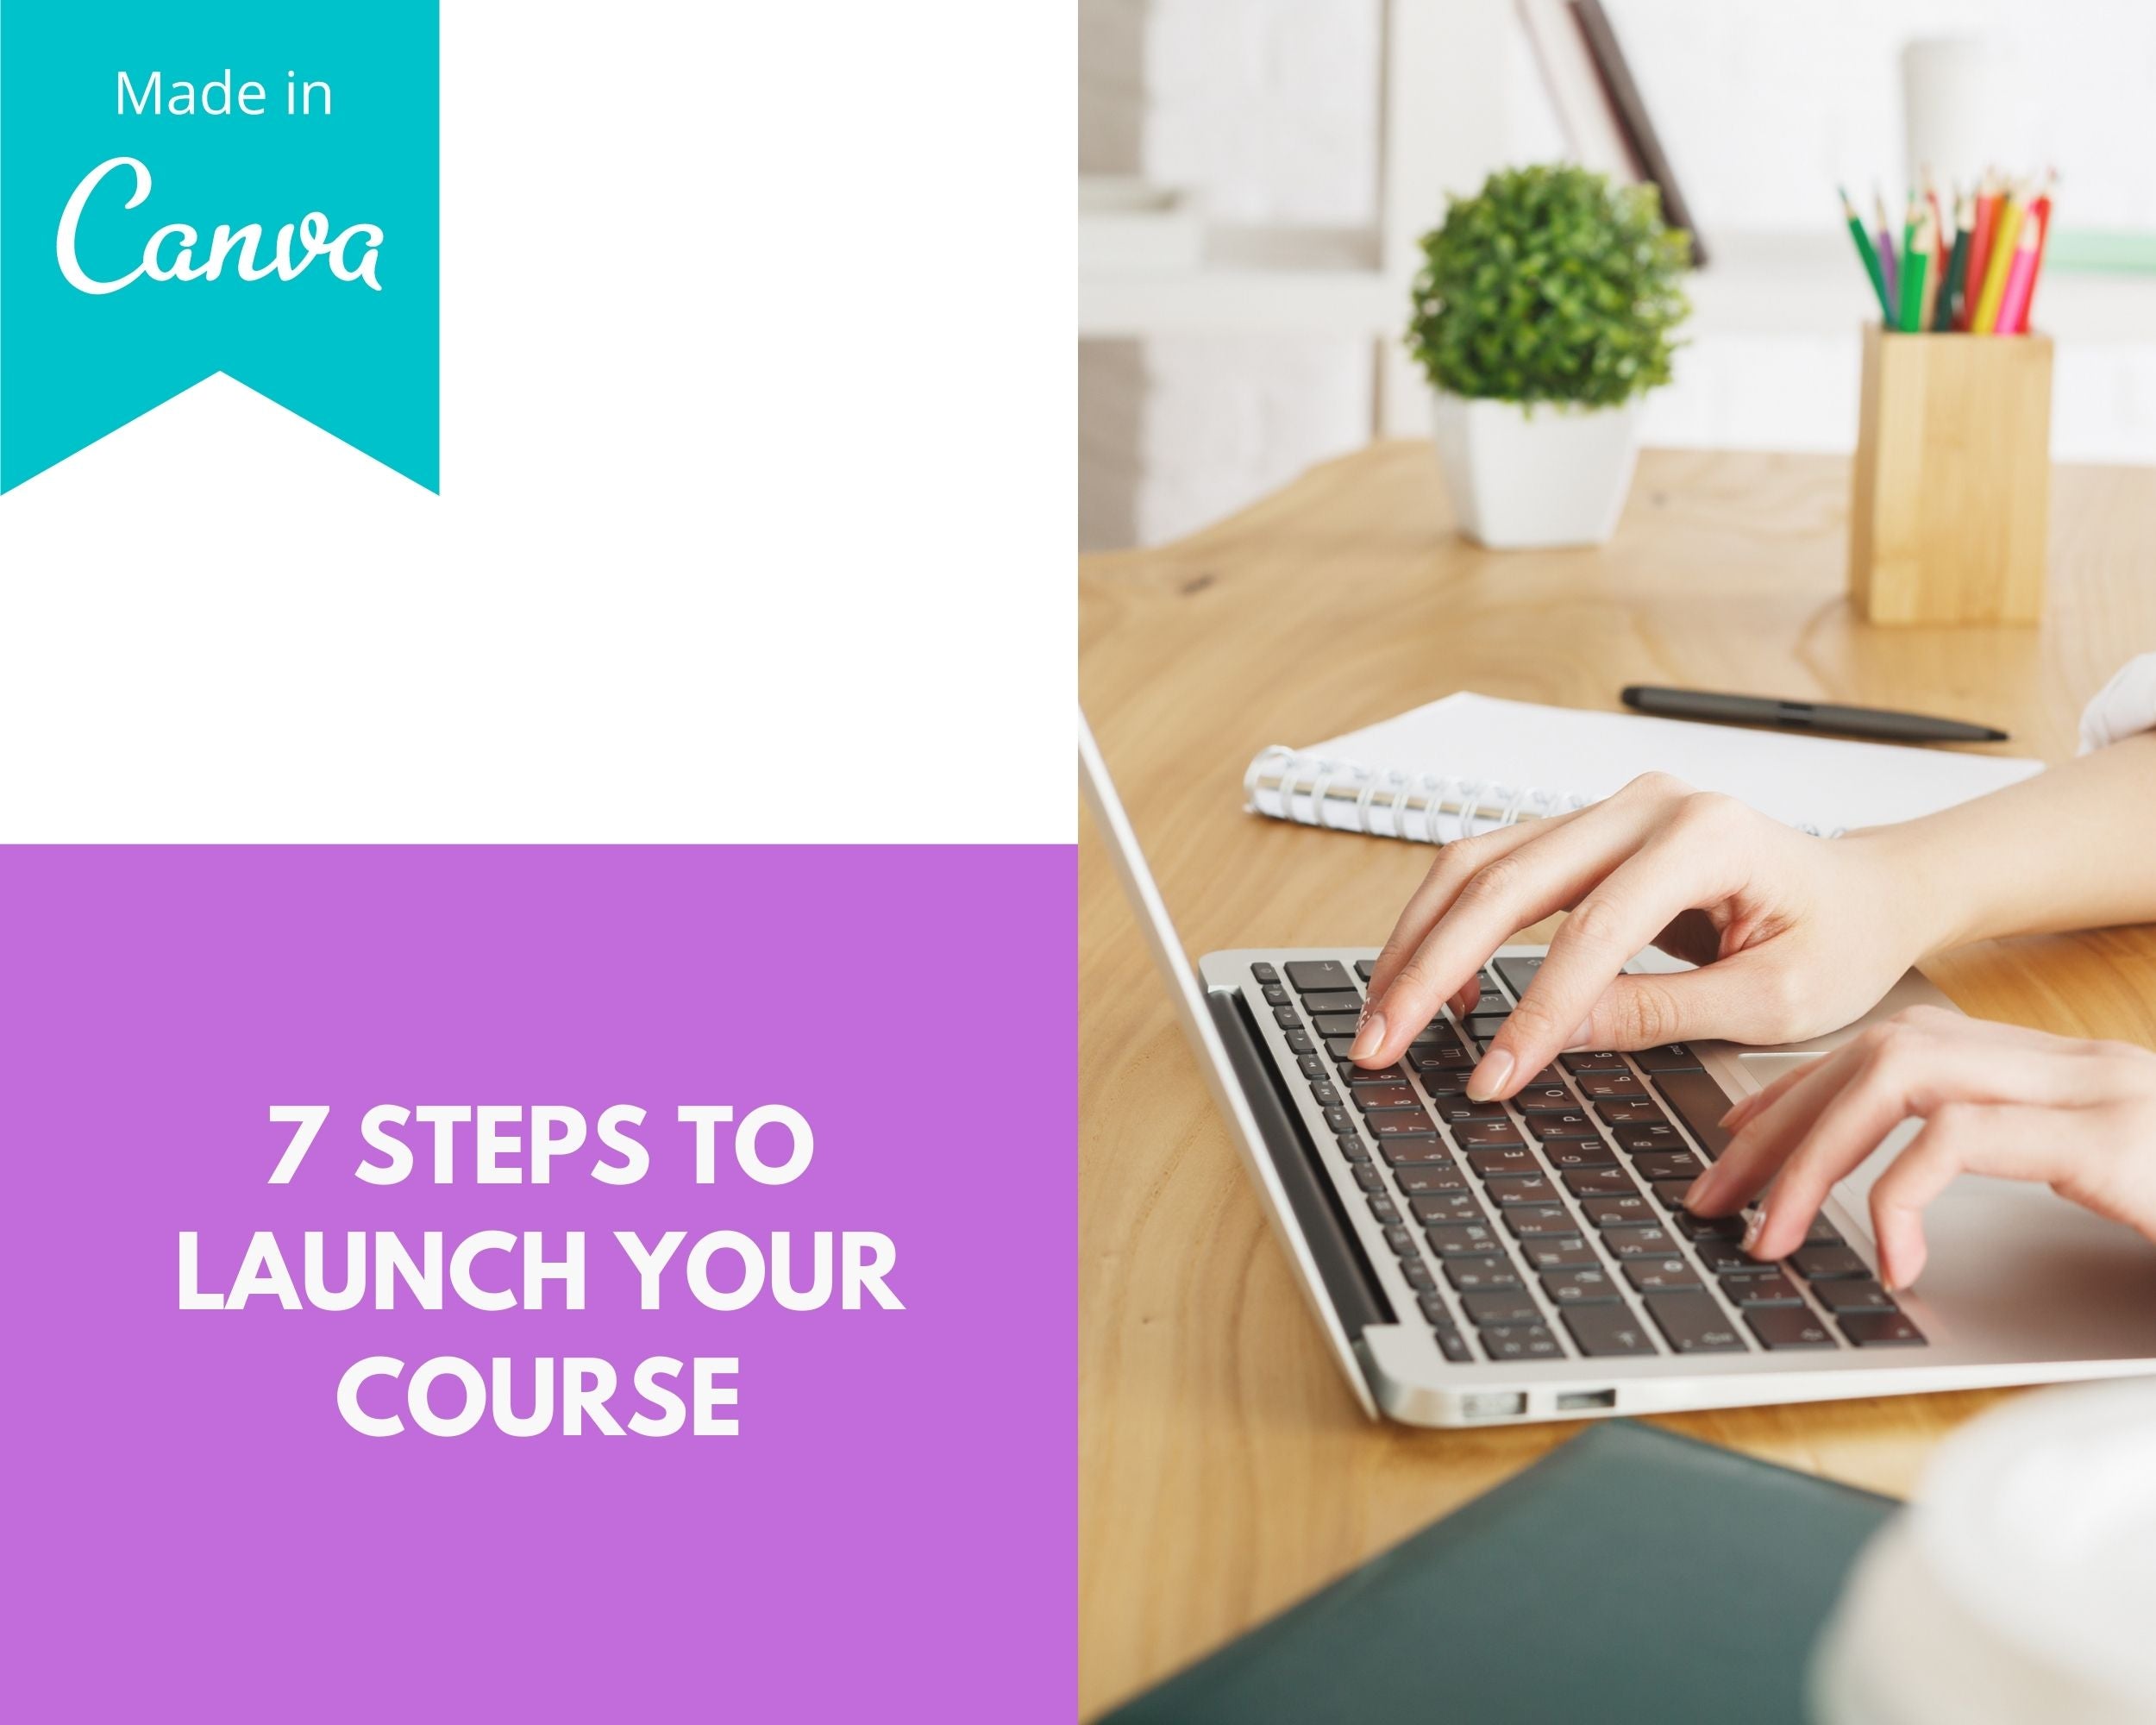 Launch Your Course Emails | Done-for-You eCourse | Rebrandable Newsletter